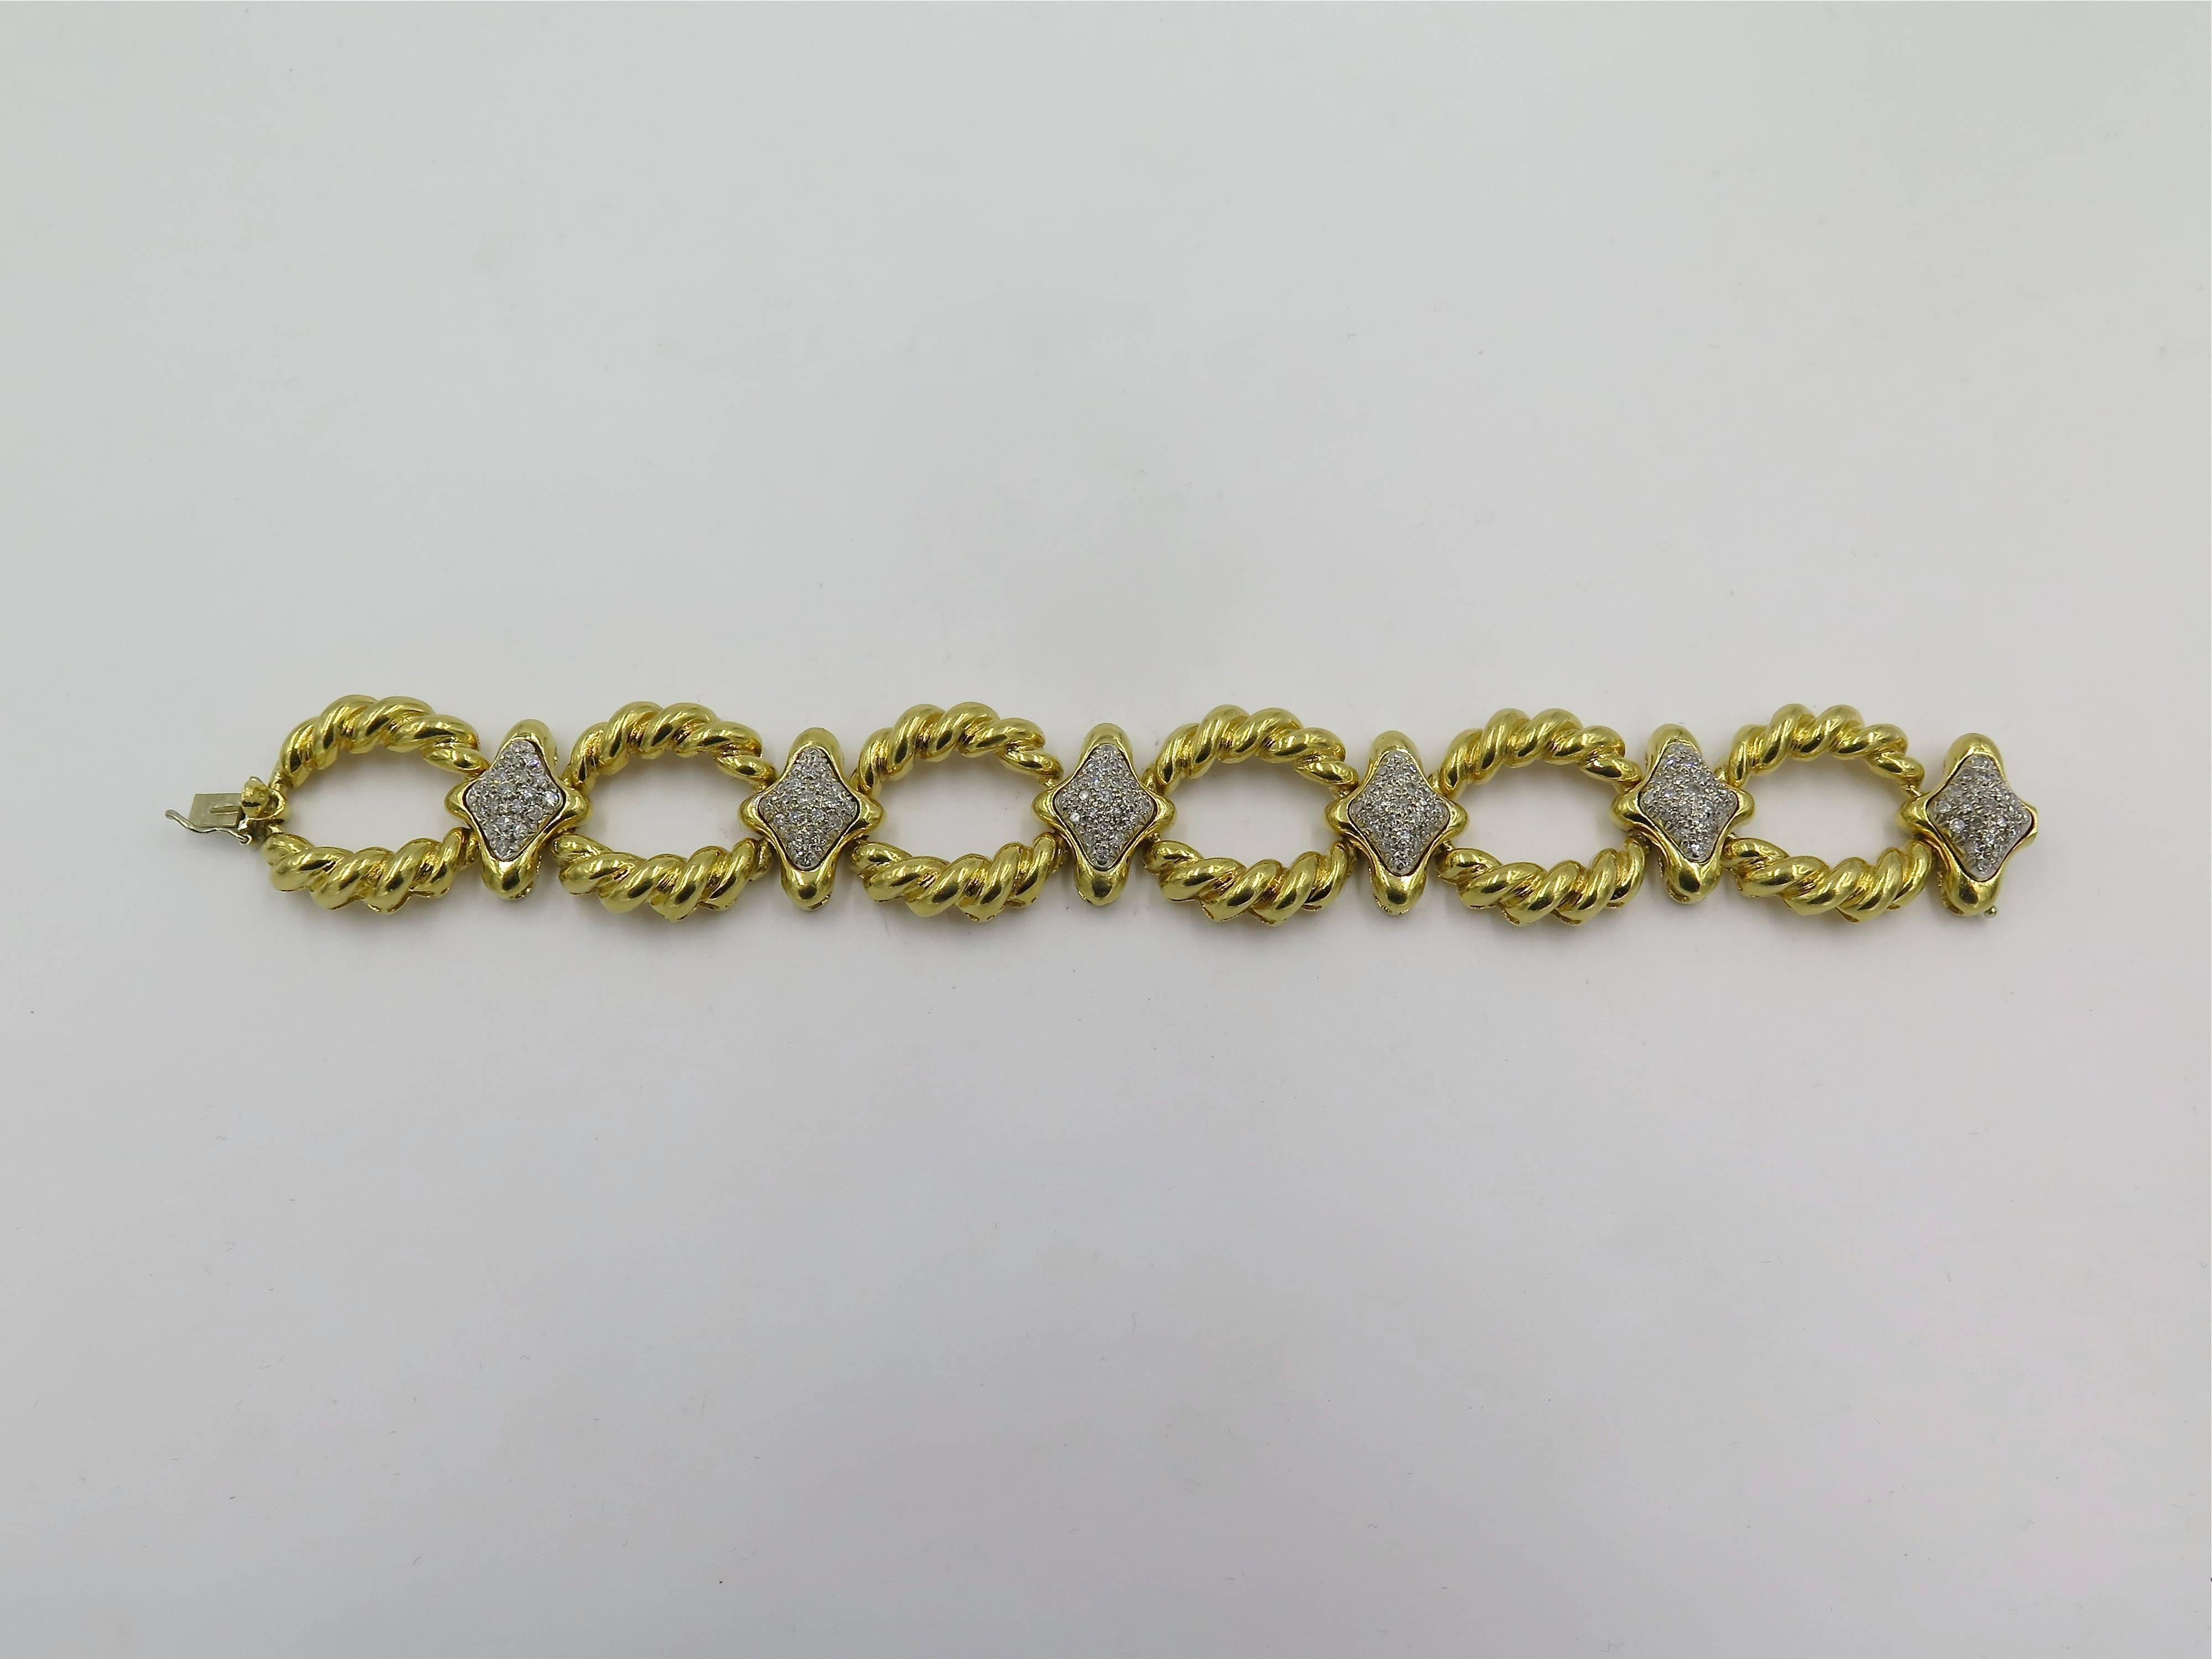 An 18 karat yellow gold and diamond bracelet.  Circa 1980’S. Designed as a line of fluted oval links, spaced by navette shaped pave set diamond links. One hundred and twenty six diamonds weigh approximately 1.40 carats. Length is approximately 7